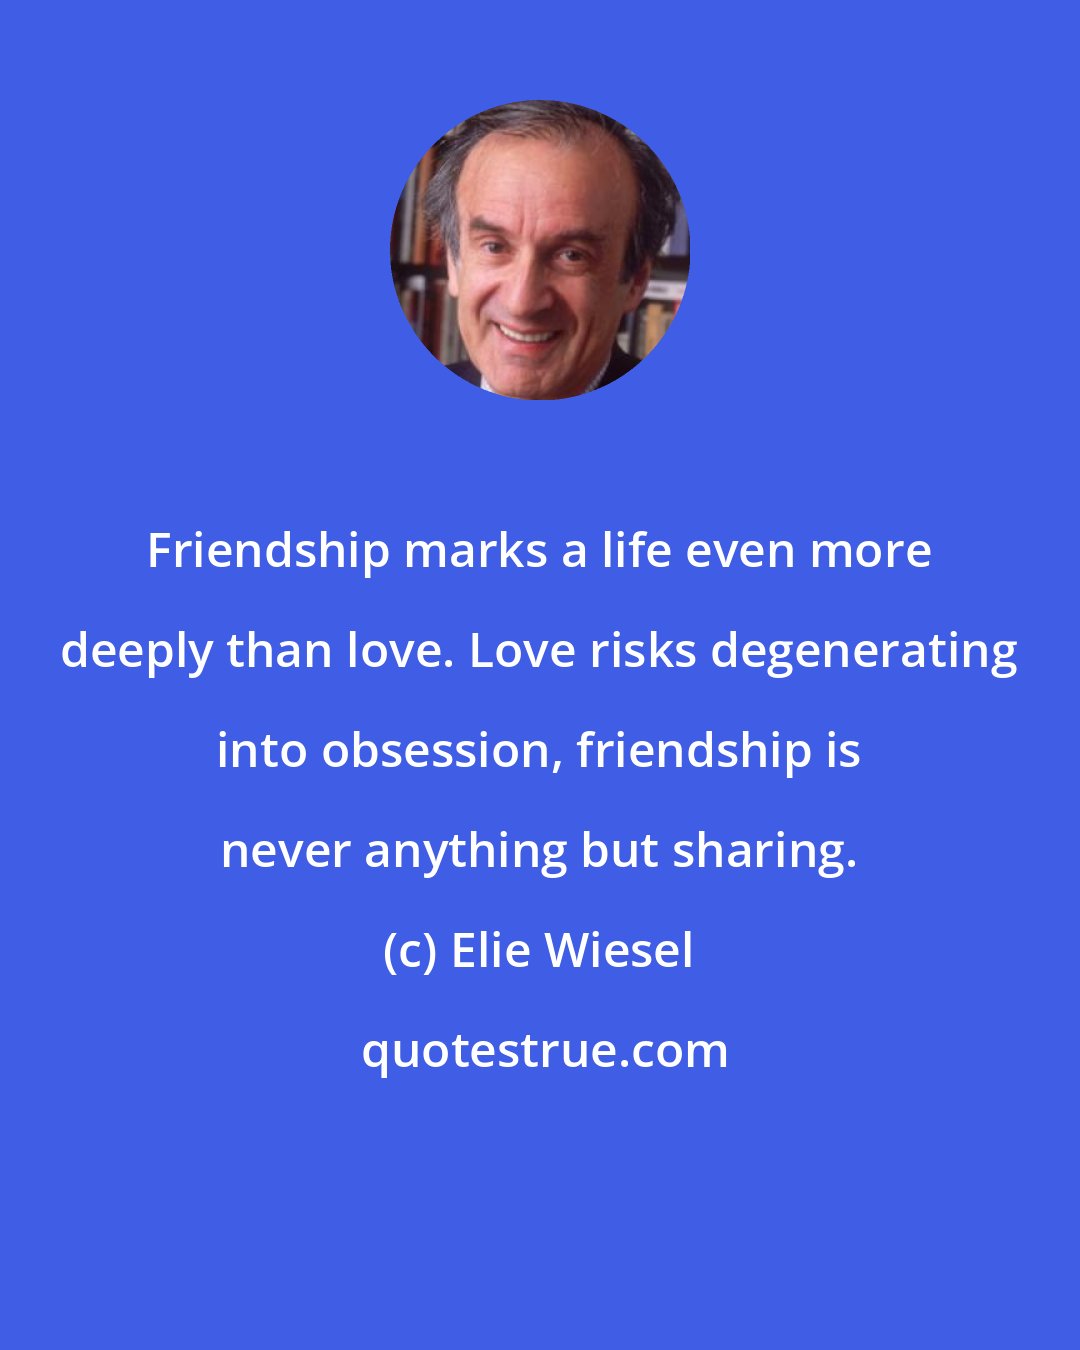 Elie Wiesel: Friendship marks a life even more deeply than love. Love risks degenerating into obsession, friendship is never anything but sharing.